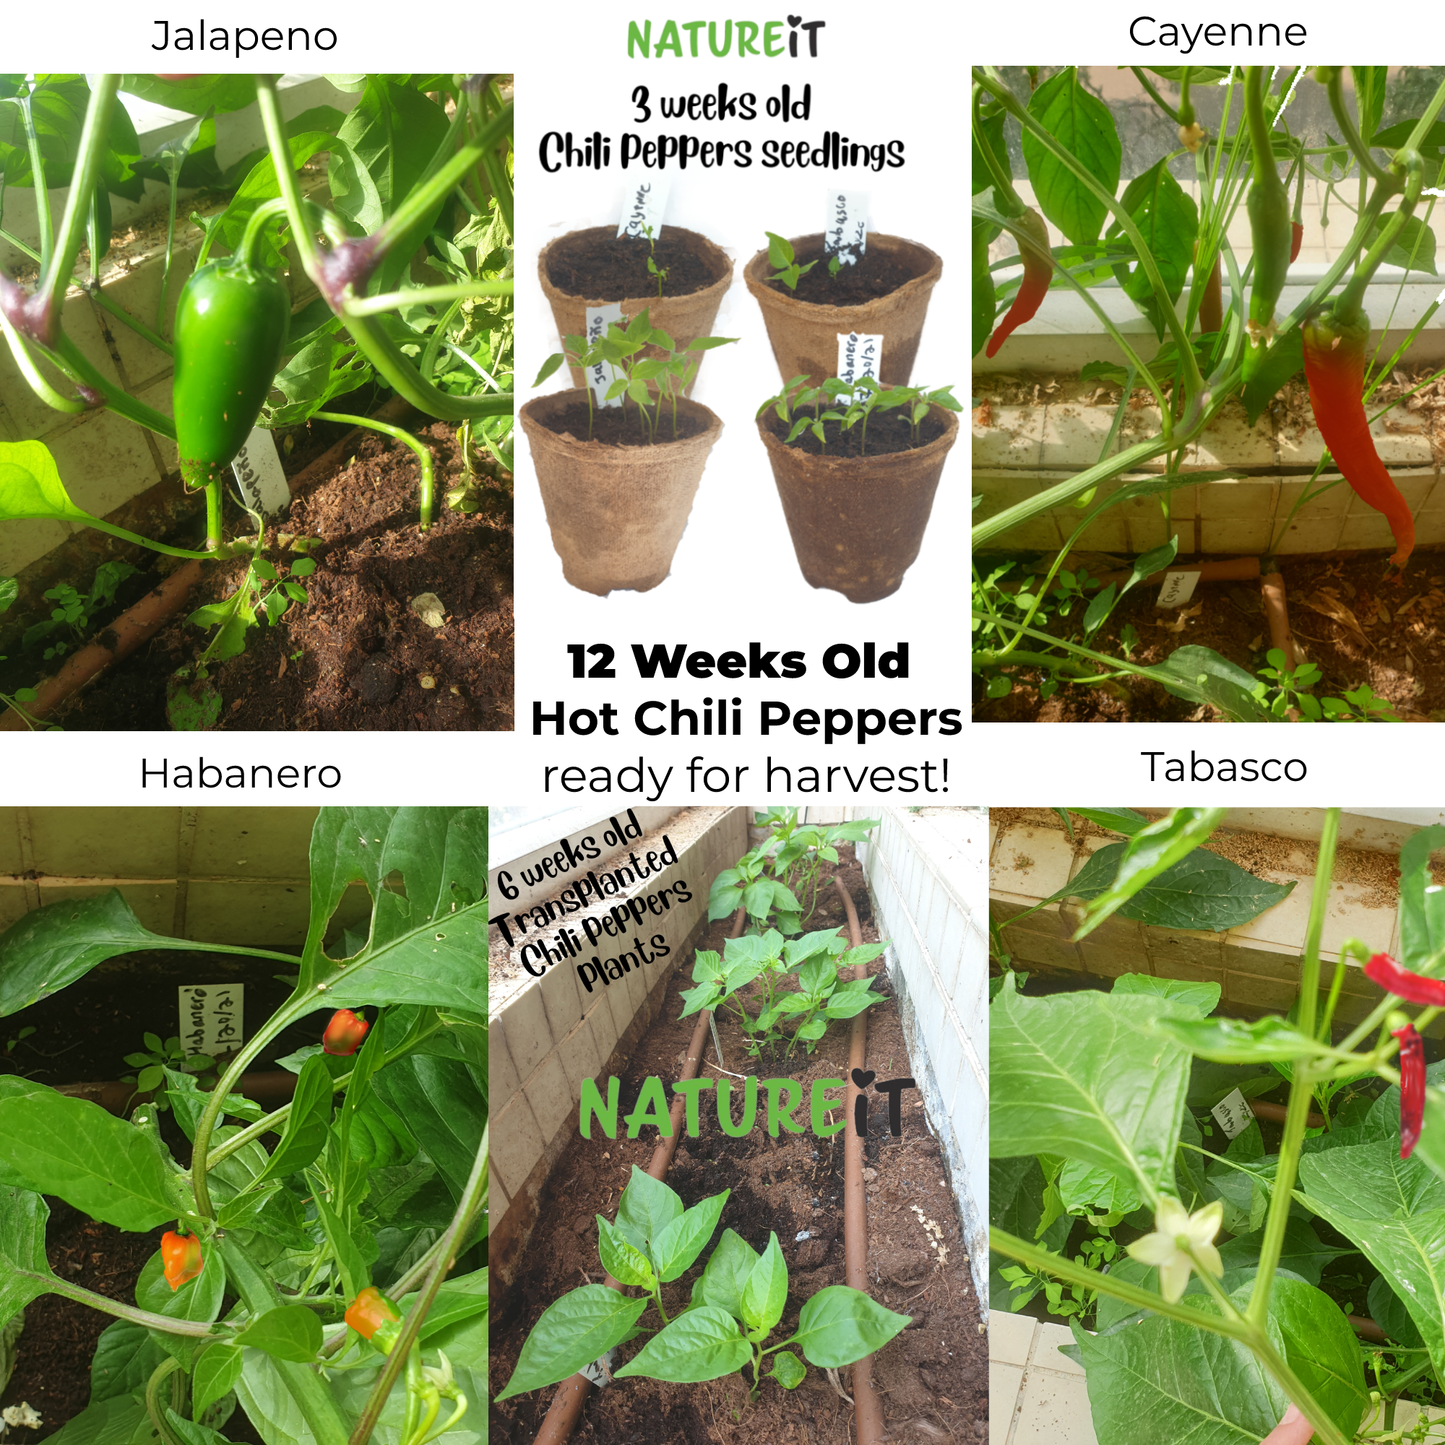 12 weeks old Hot chili peppers grown from seed with Natureit Hot Chili Peppers seed starter kit